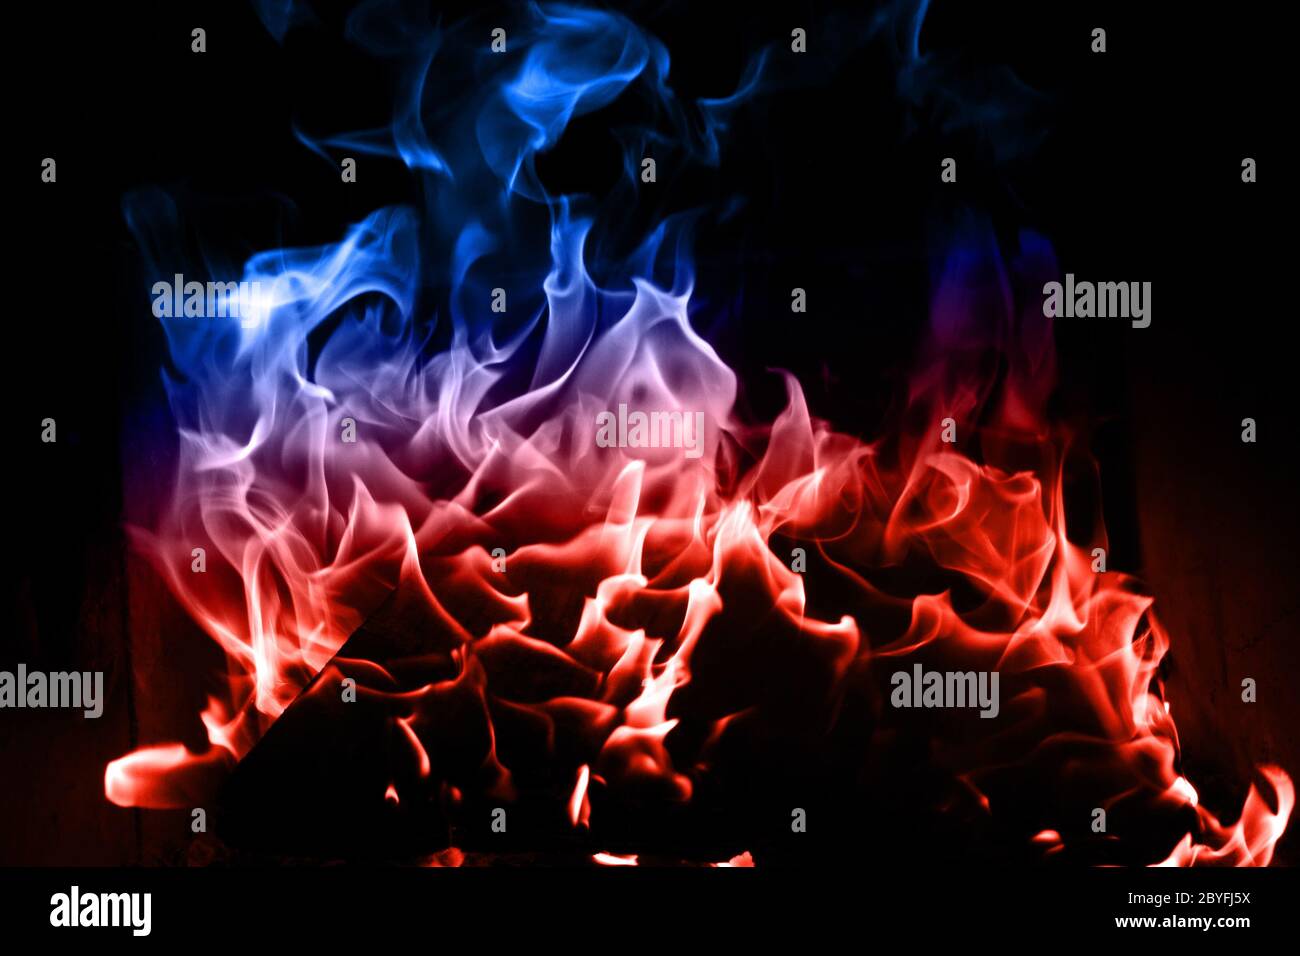 Blue and red flame isolated on dark background Stock Photo